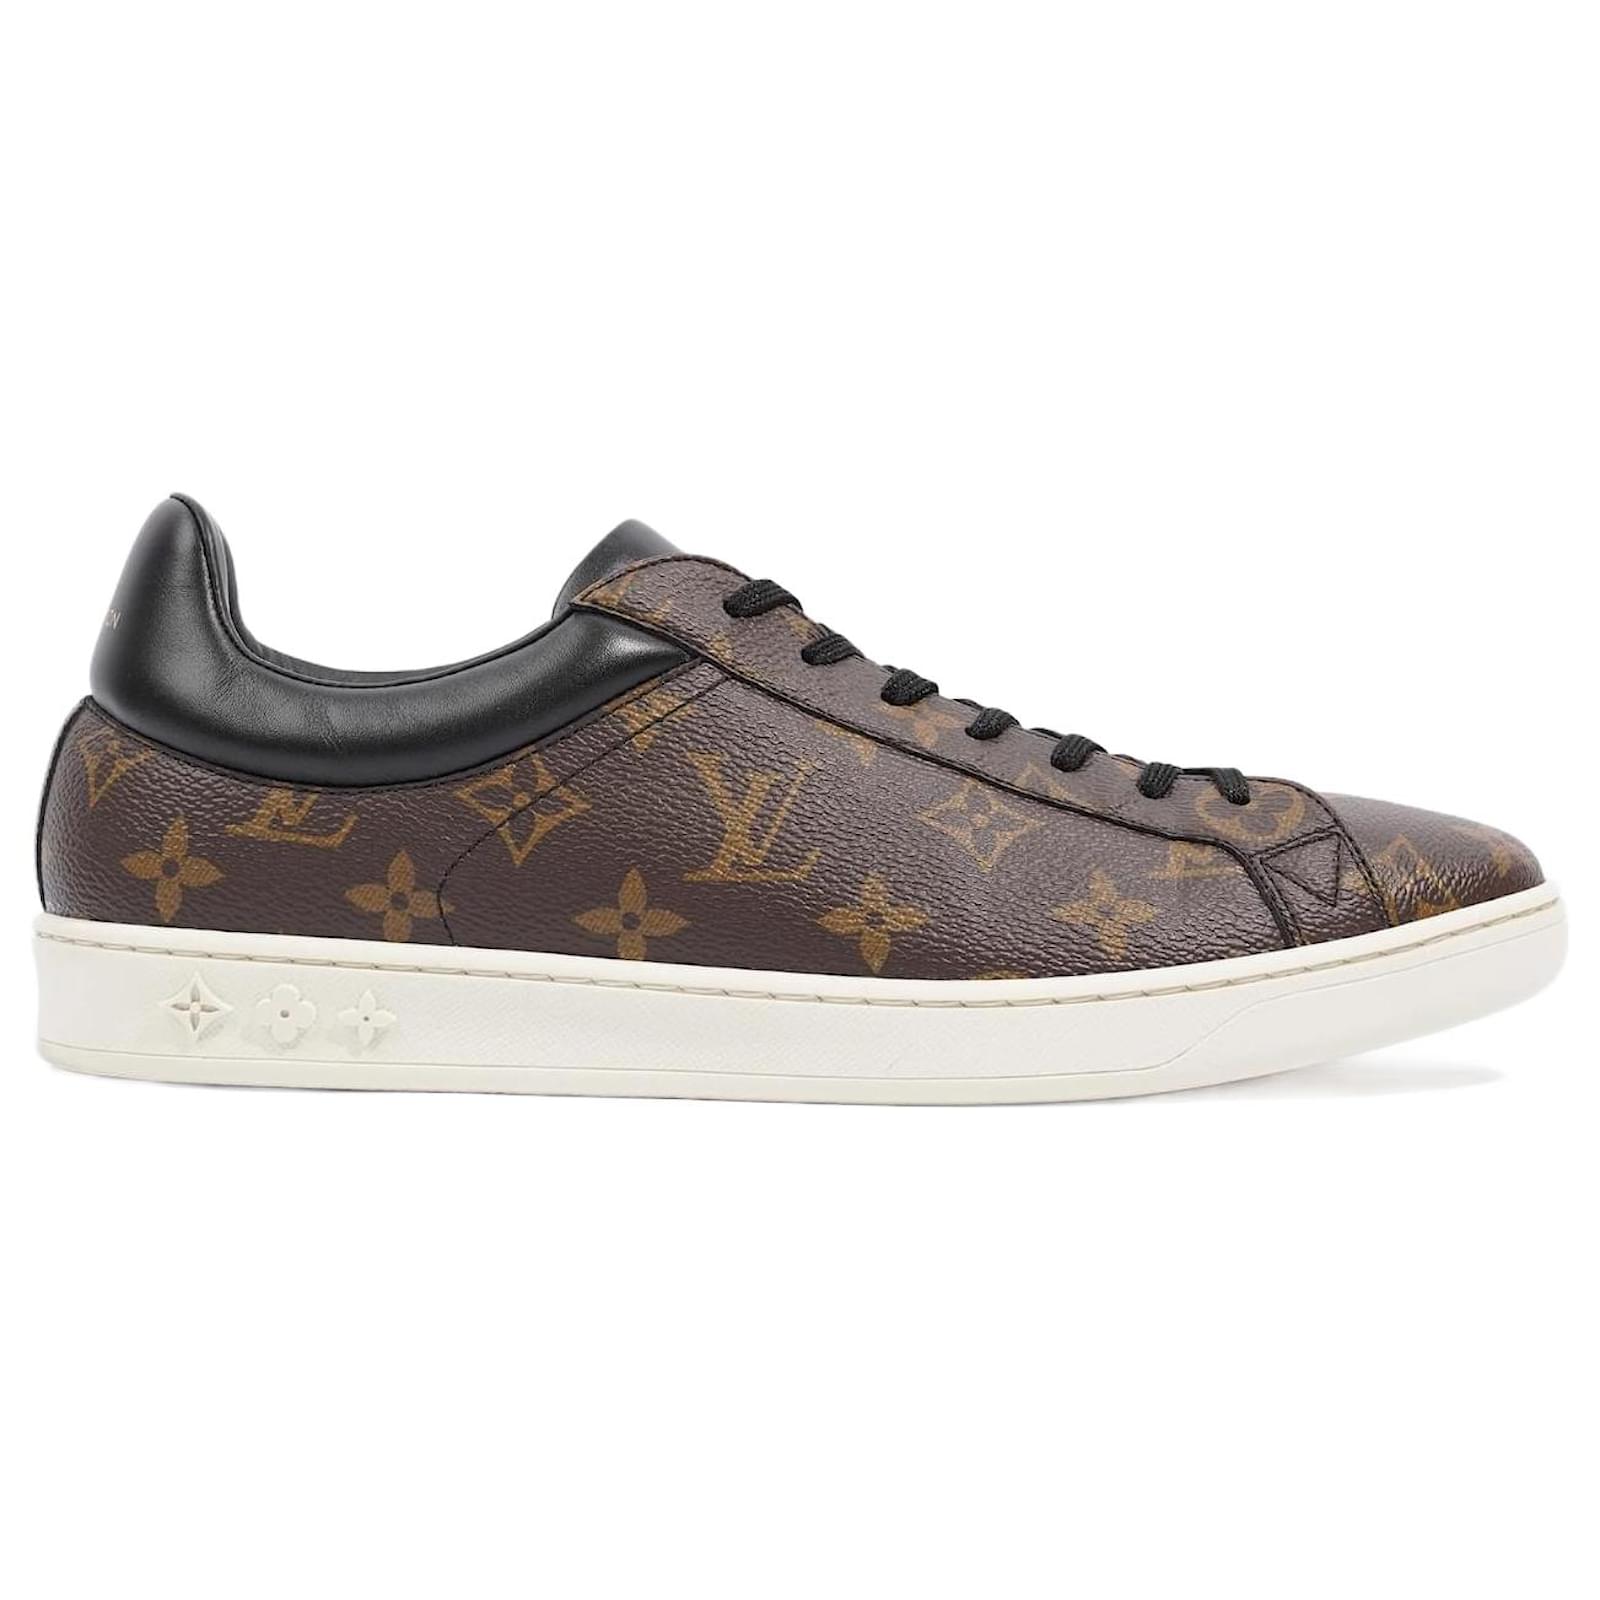 Louis Vuitton Luxembourg Sneaker, Brown, 8